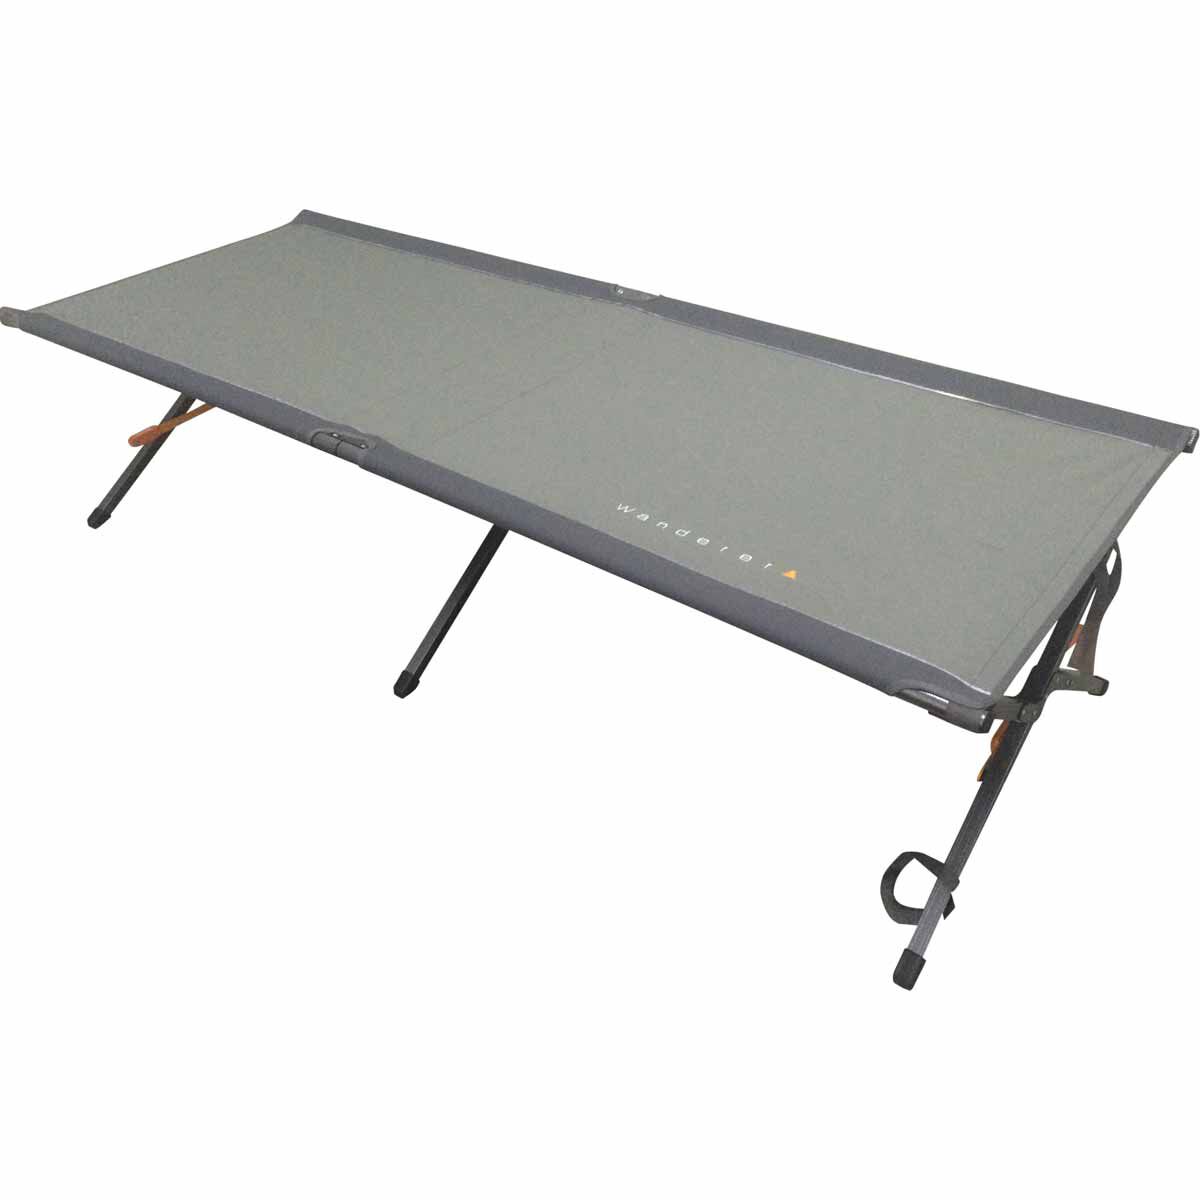 camping stretcher beds for sale